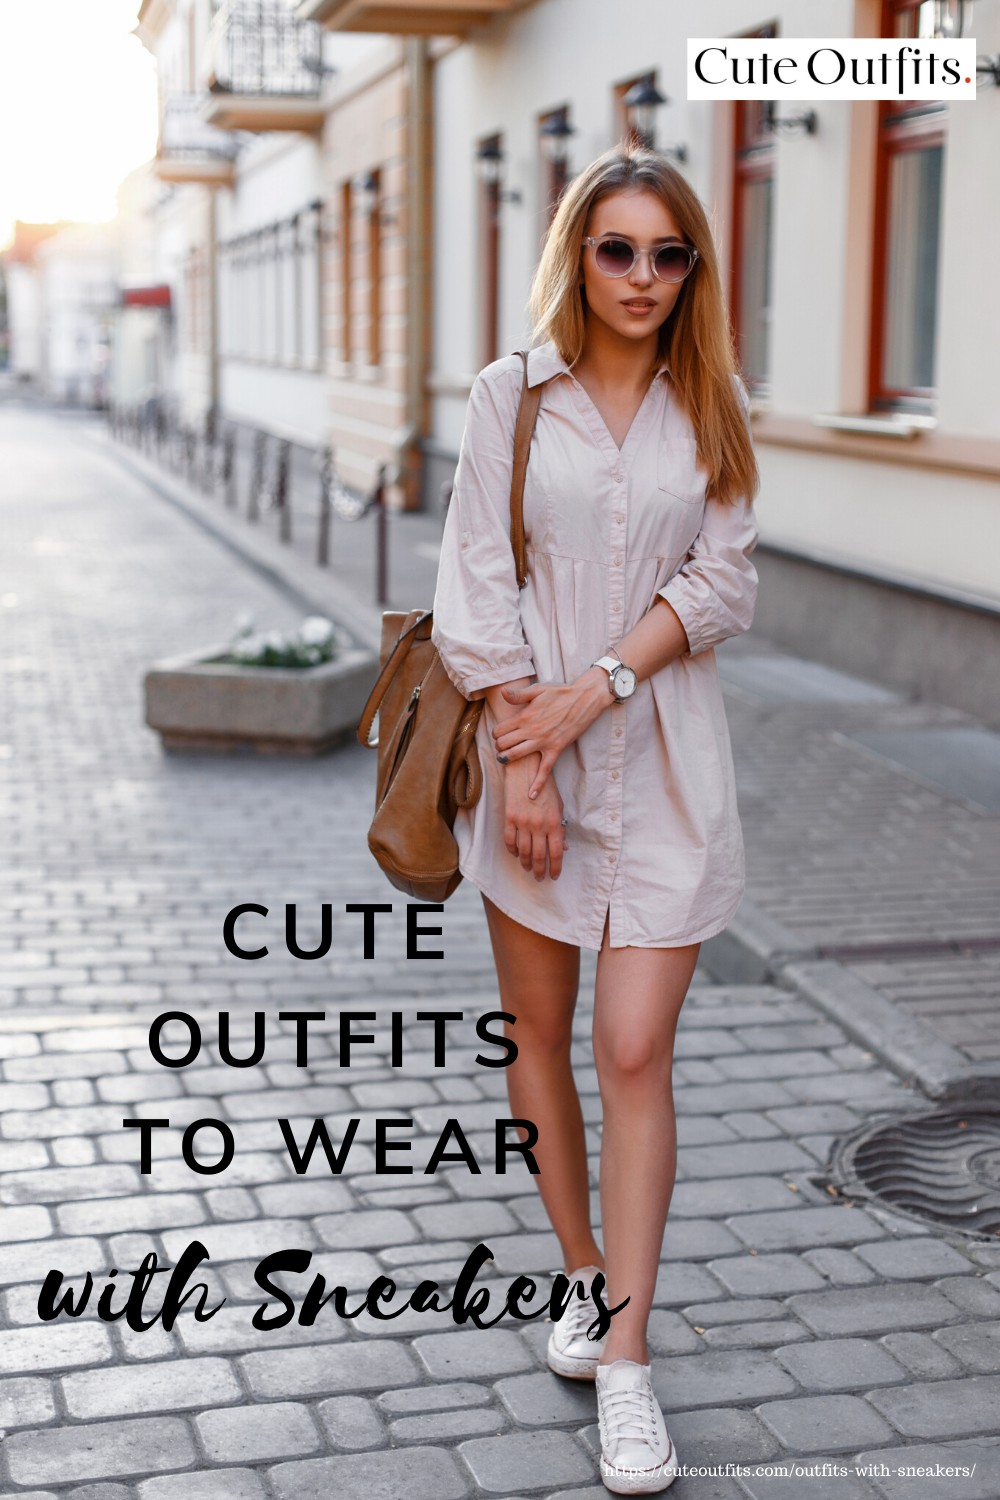 placard | 11 Cool and Chic Outfits To Wear With Your Fave Sneakers